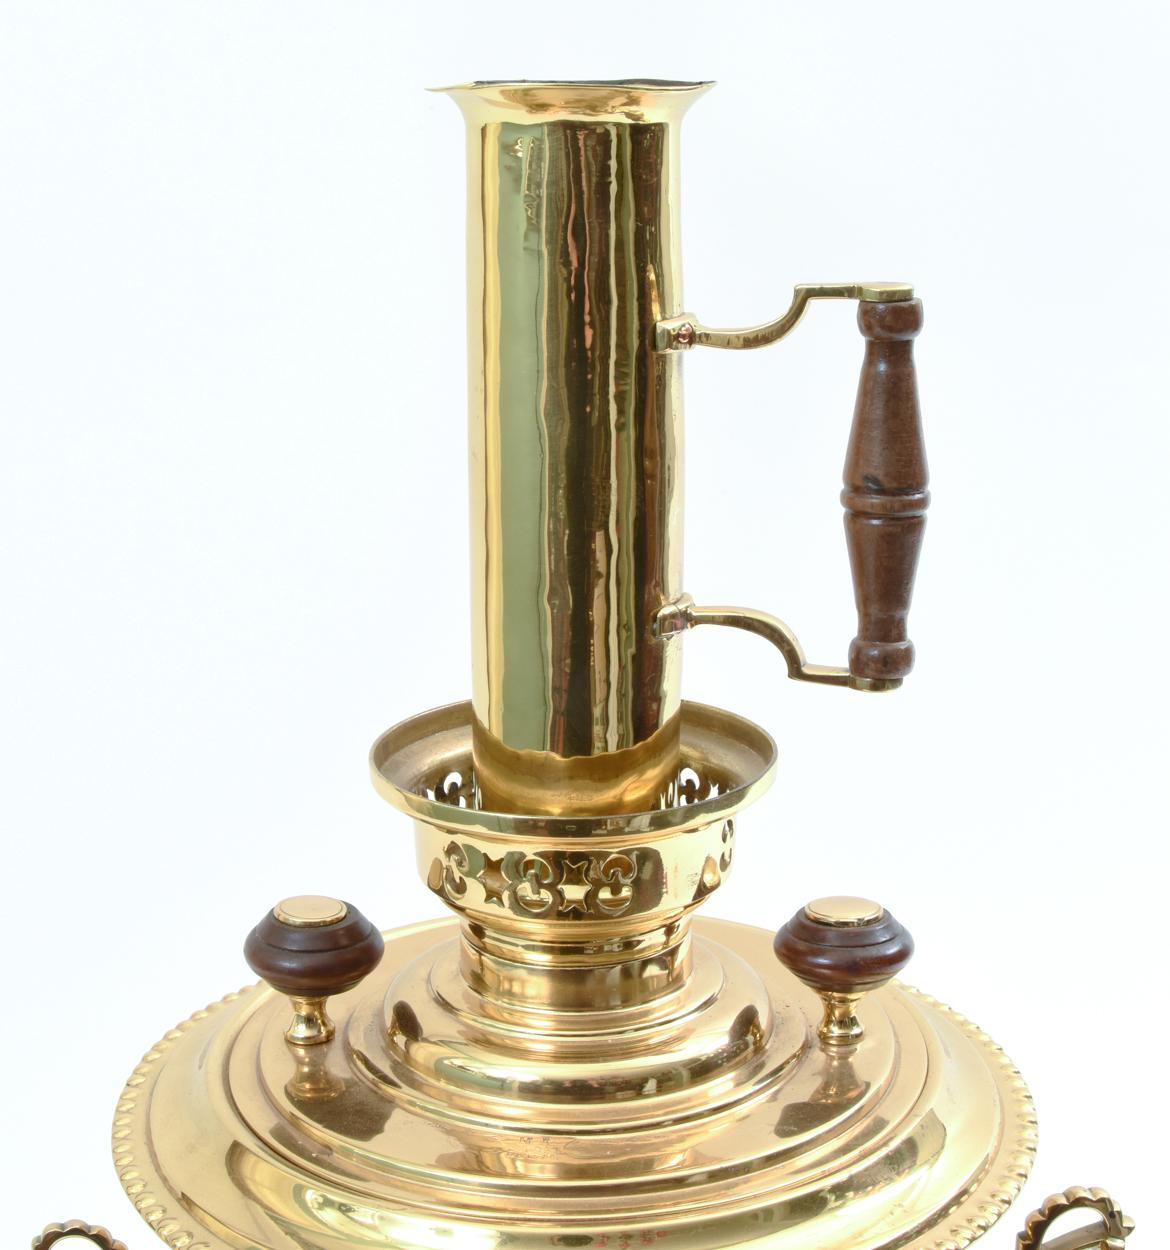 Vintage Eastern European solid brass hallmarked large coffee, tea, water boiling serving samovar with wood side handles. The serving samovar is in excellent vintage condition, minor wear consistent with use / age. The samovar measure about 26 inches